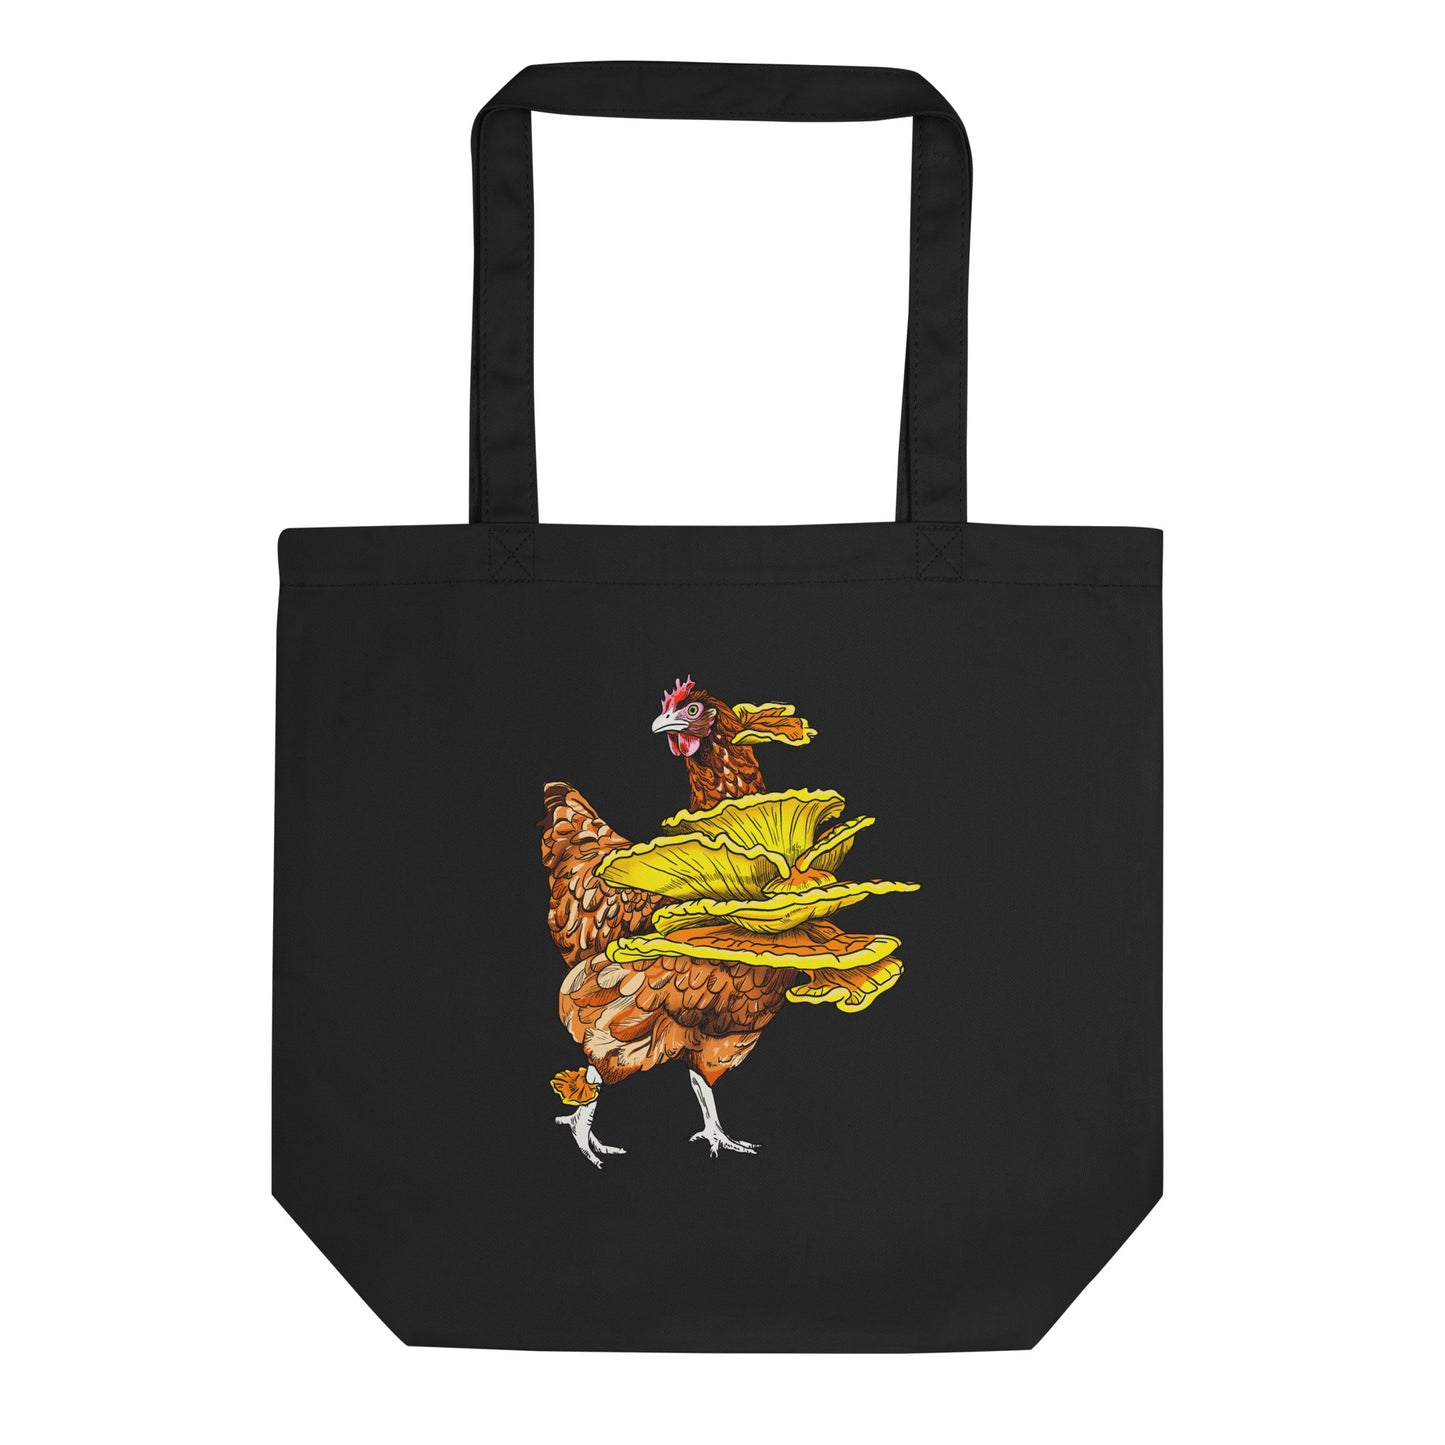 Chicken Of The Woods | Eco-Friendly Tote Bag | Funny Mushroom Artwork